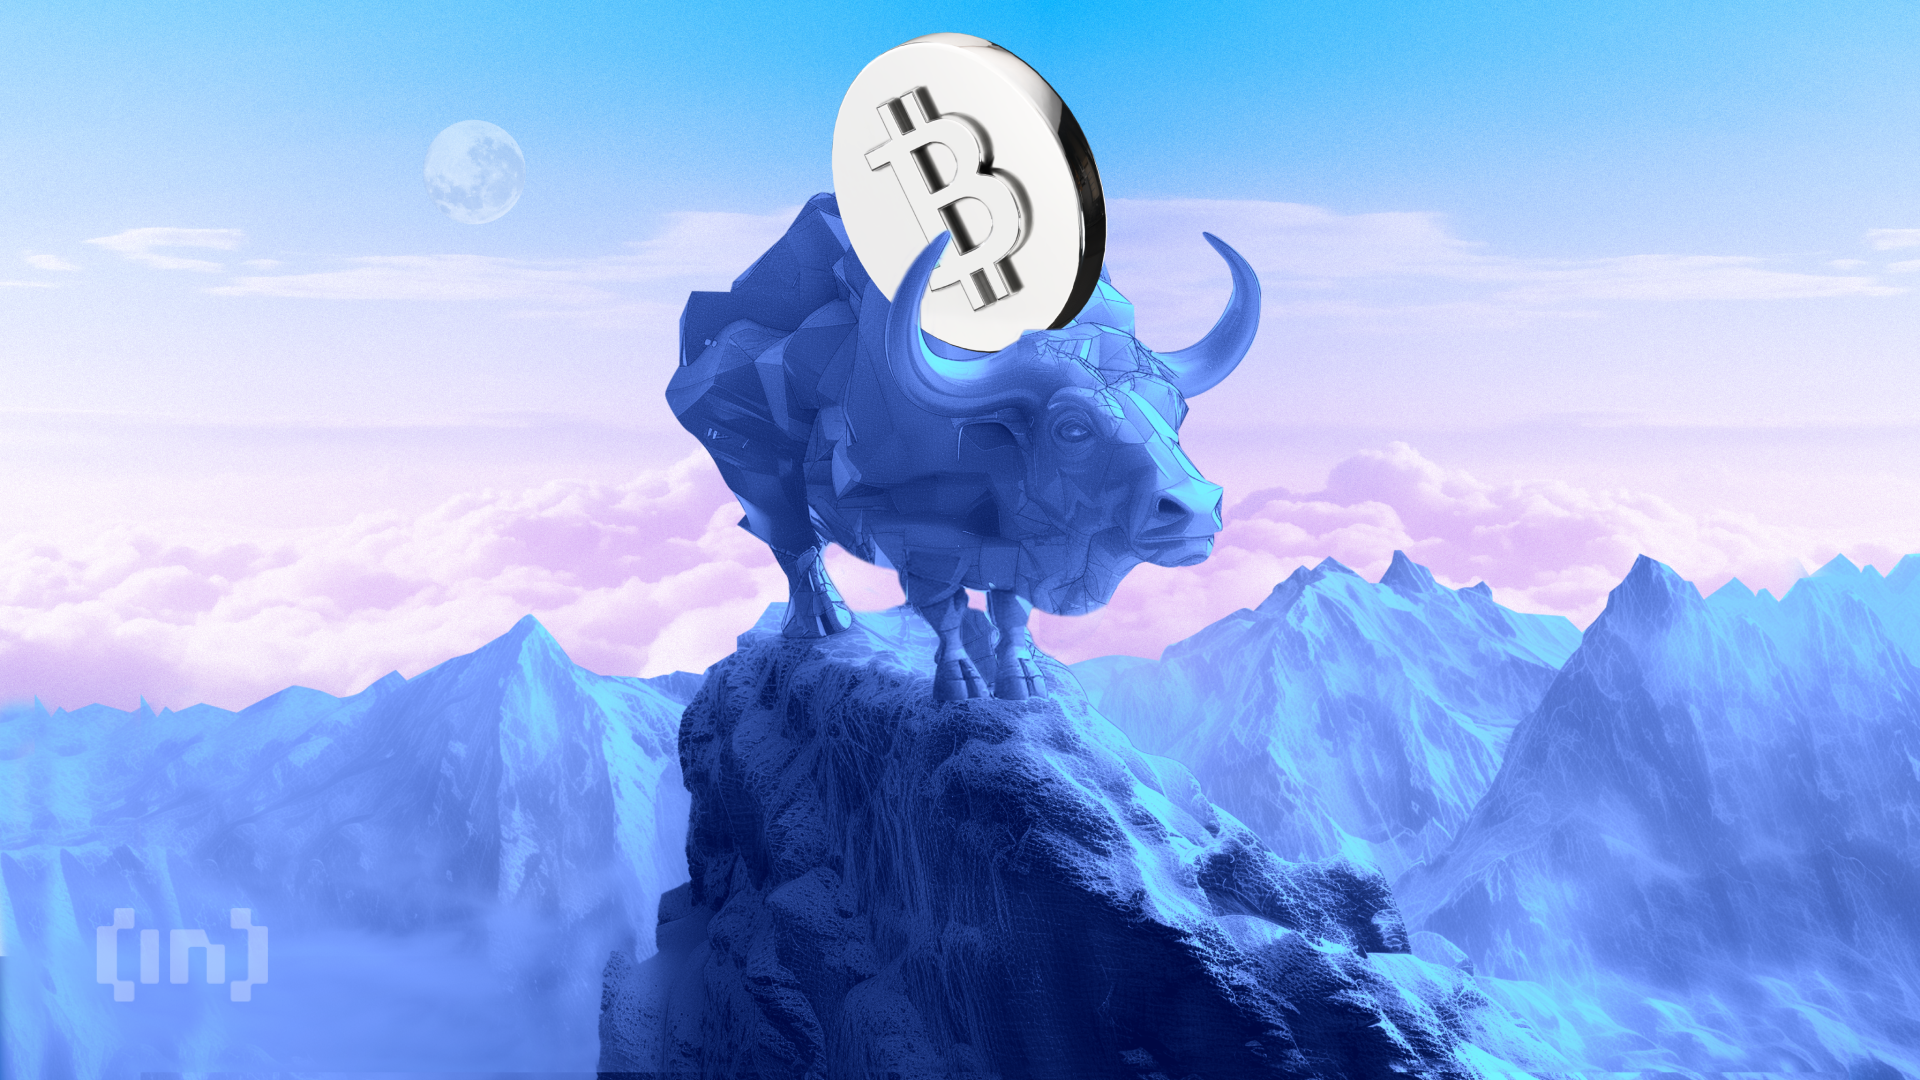 Is This the End of Bitcoin, Altcoin Bull Market? Analyst Speak Out